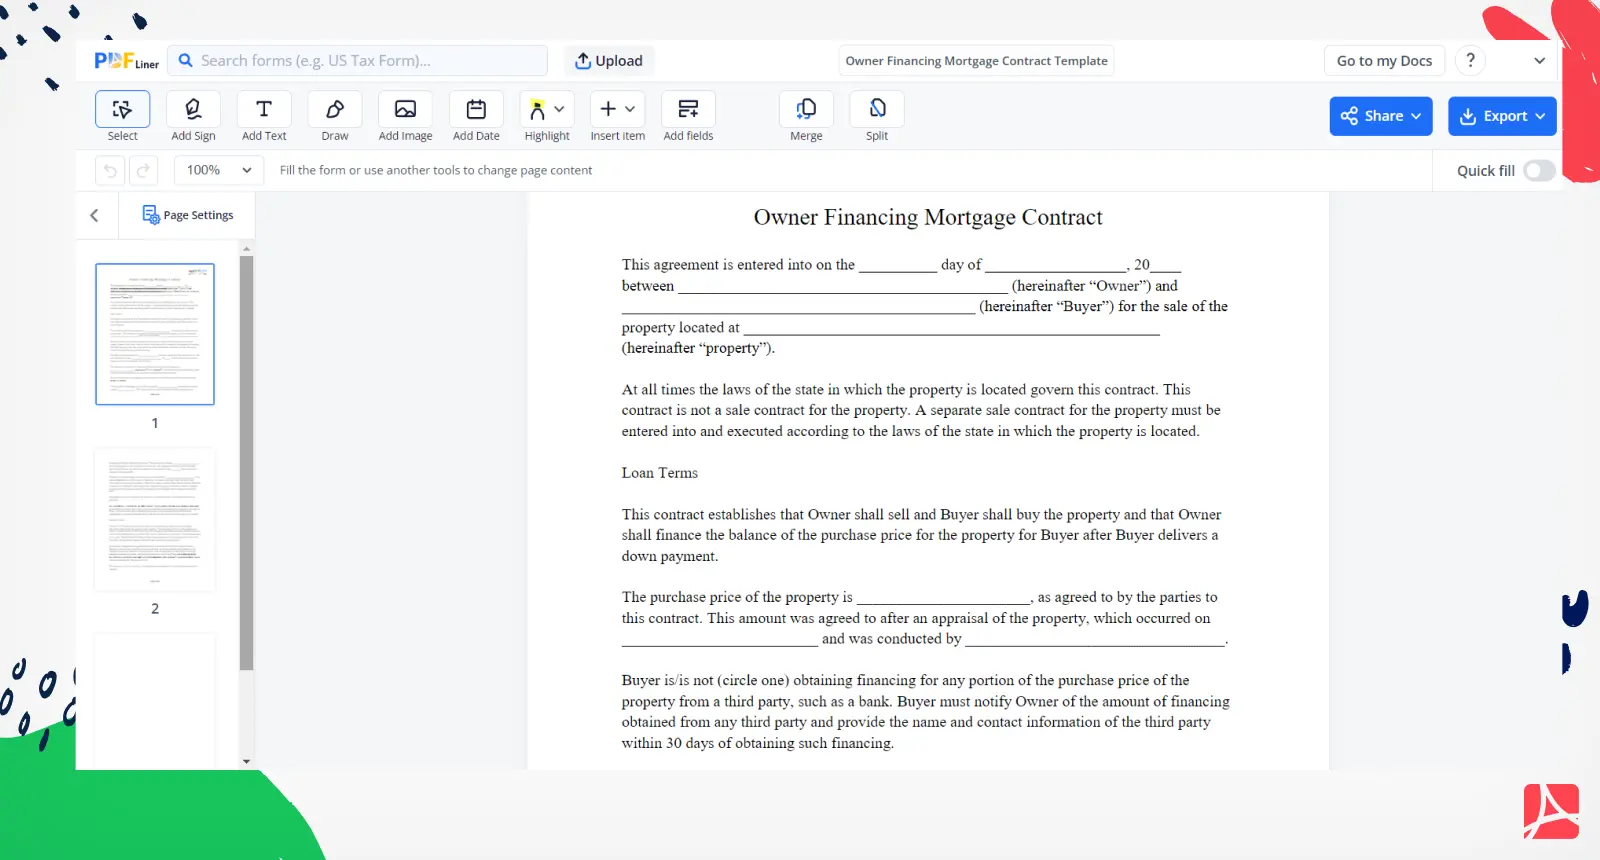 Owner Financing Mortgage Contract Screenshot 1